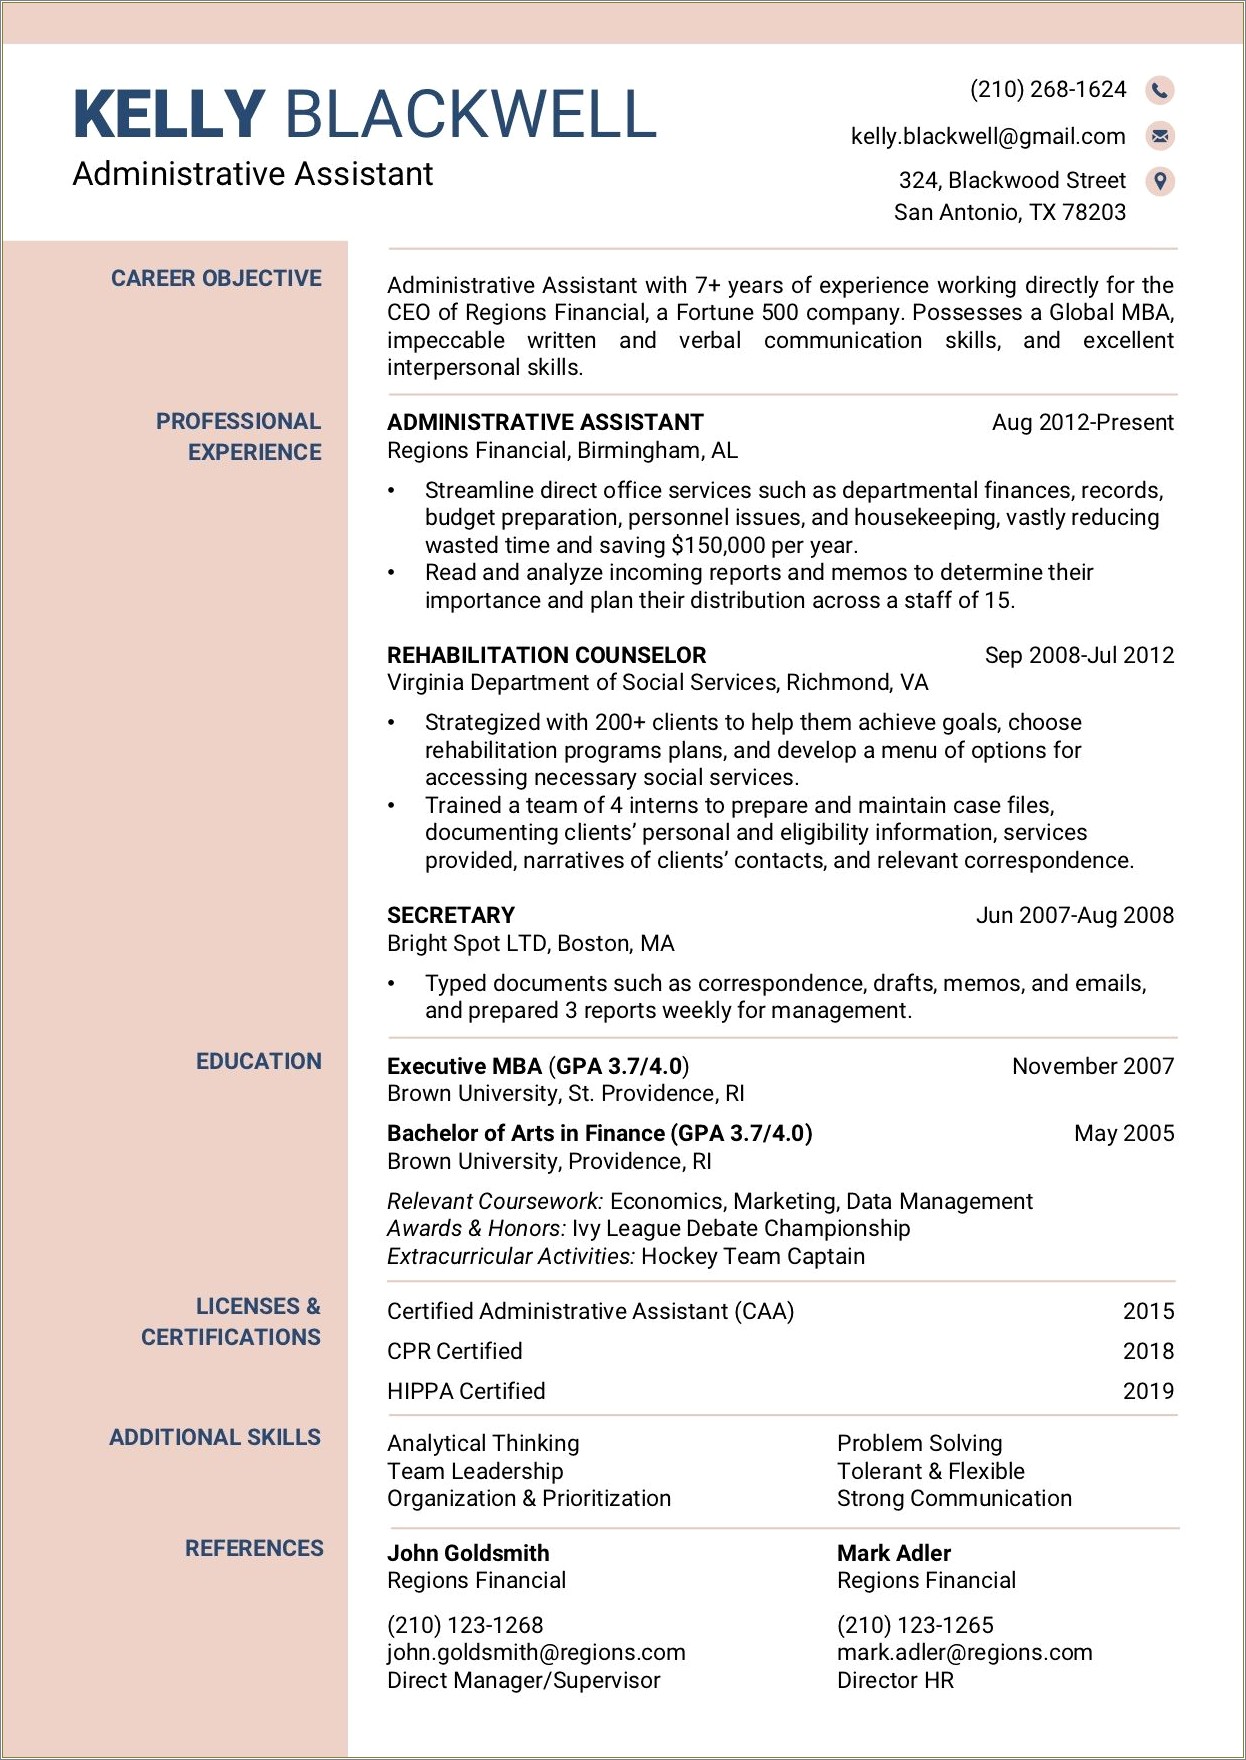 Communication Skills And Abilities For Resume